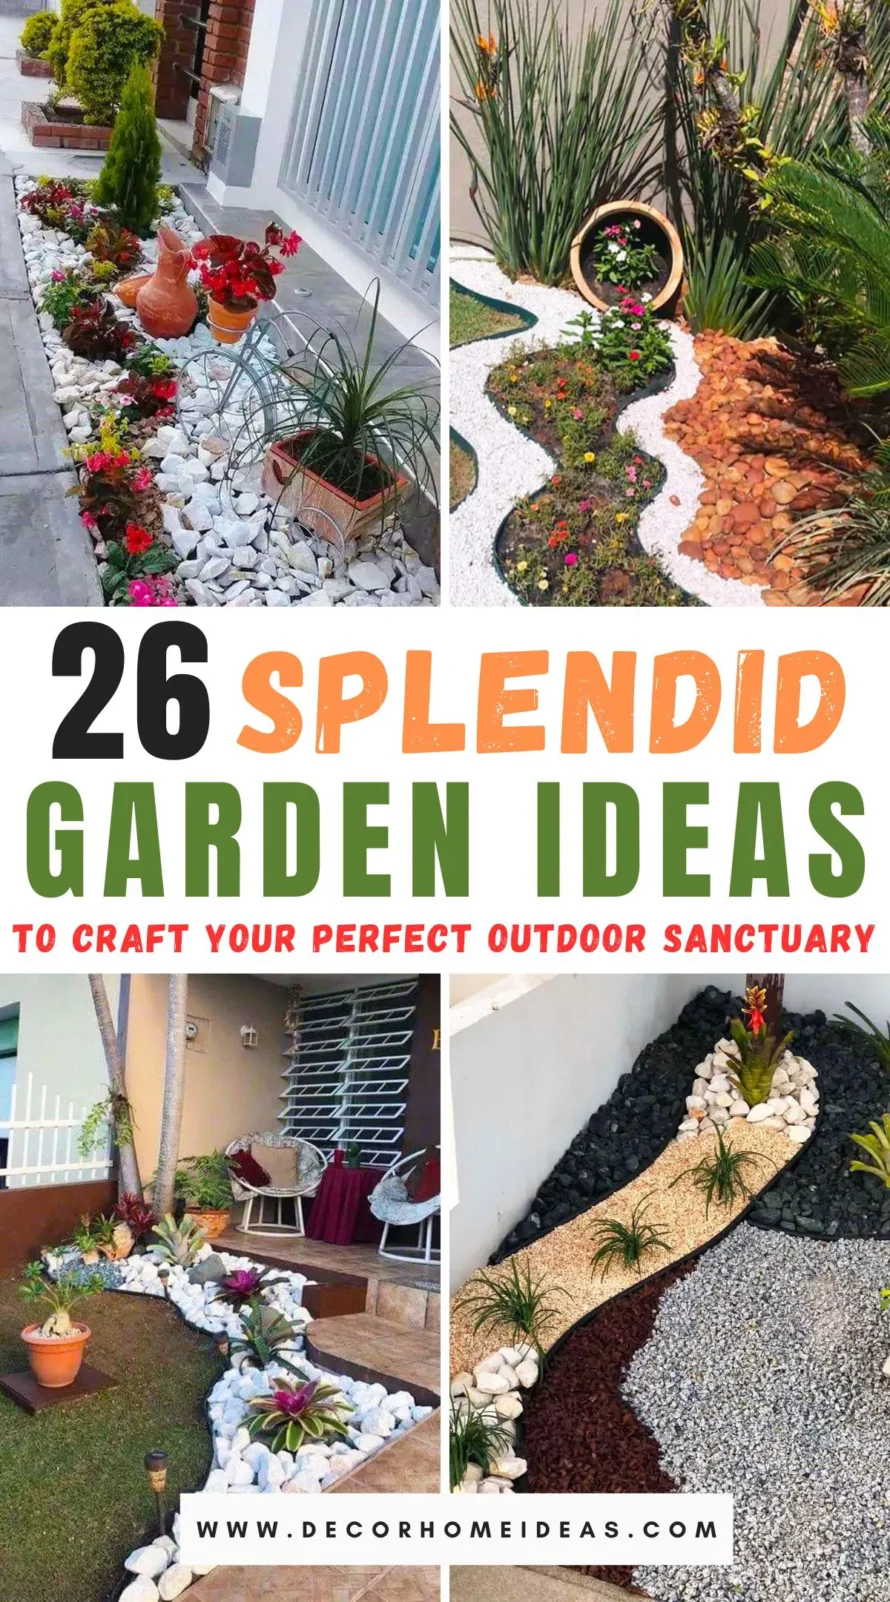 Explore 26 splendid garden ideas tailored to help you create the ultimate outdoor sanctuary. From tranquil water features to vibrant flower beds, these tips promise to elevate your garden into a serene escape. Perfect for any space—find out how!